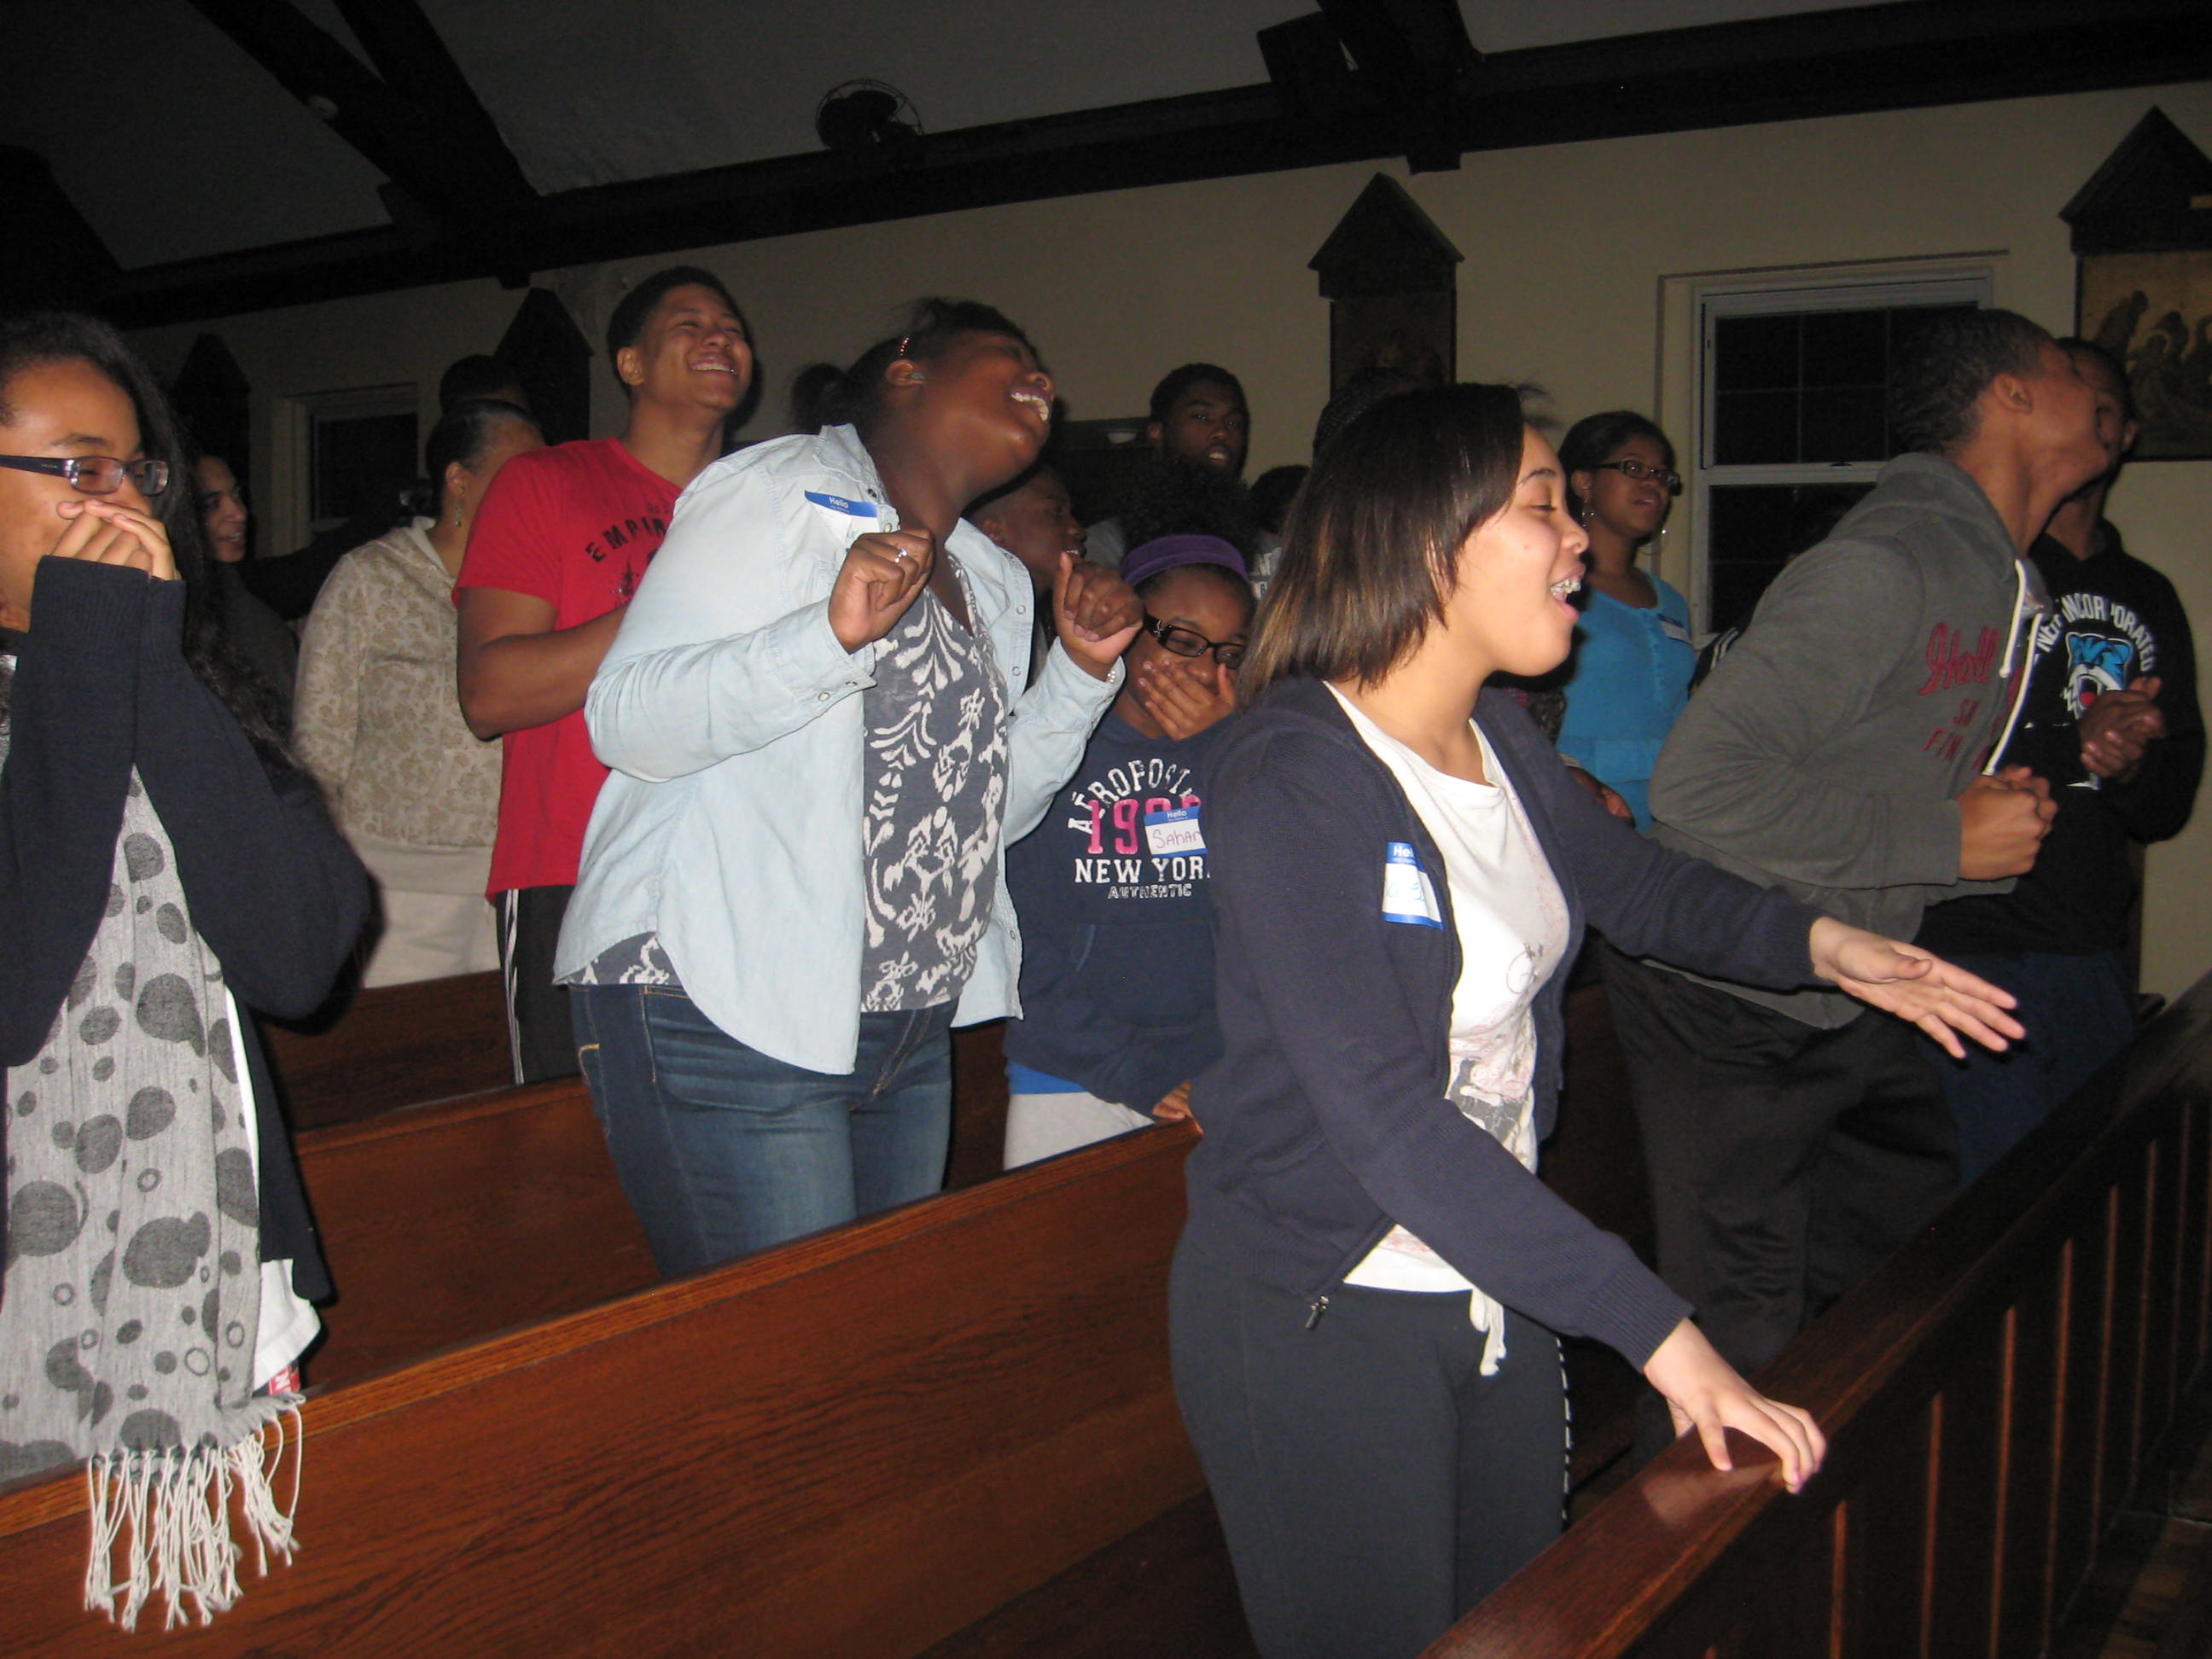 Photo by Maquane Dawson. Youth from Our Lady of Light parish, St. Albans, participate in praise and worship led by the New Name Band during their all-night retreat. 